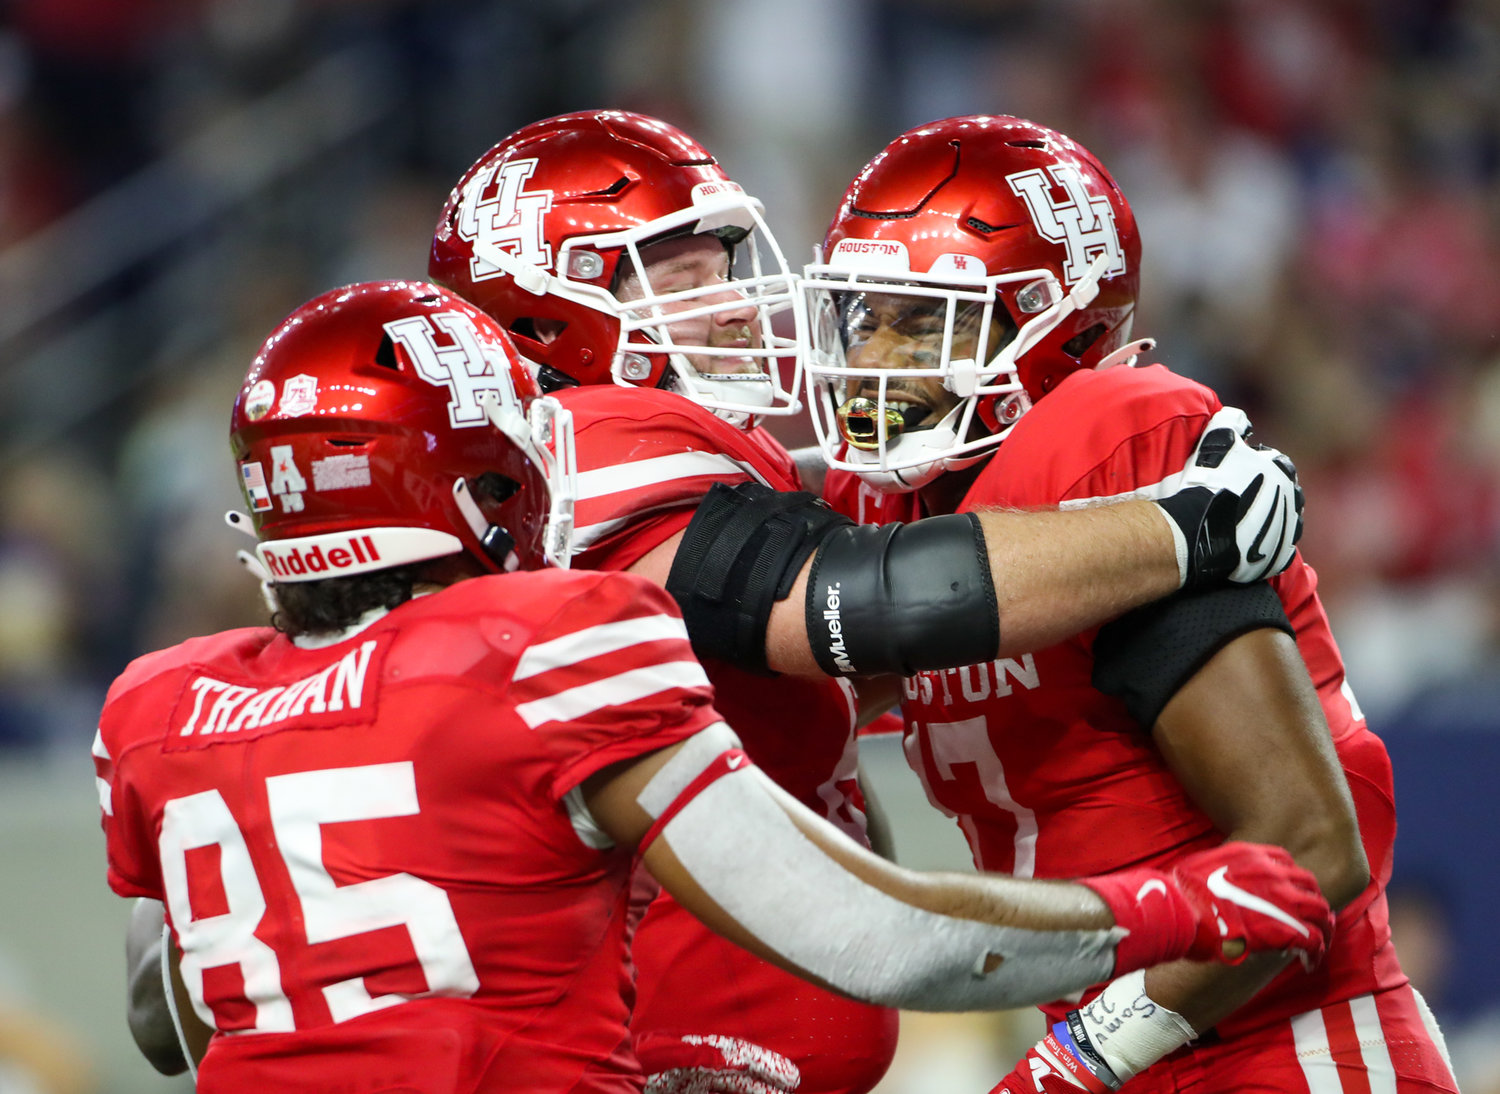 Houston Cougars tight end Seth Green (17) celebrates with teammates after a touchdown catch during an NCAA football game between Houston and Texas Tech on September 4, 2021 in Houston, Texas.